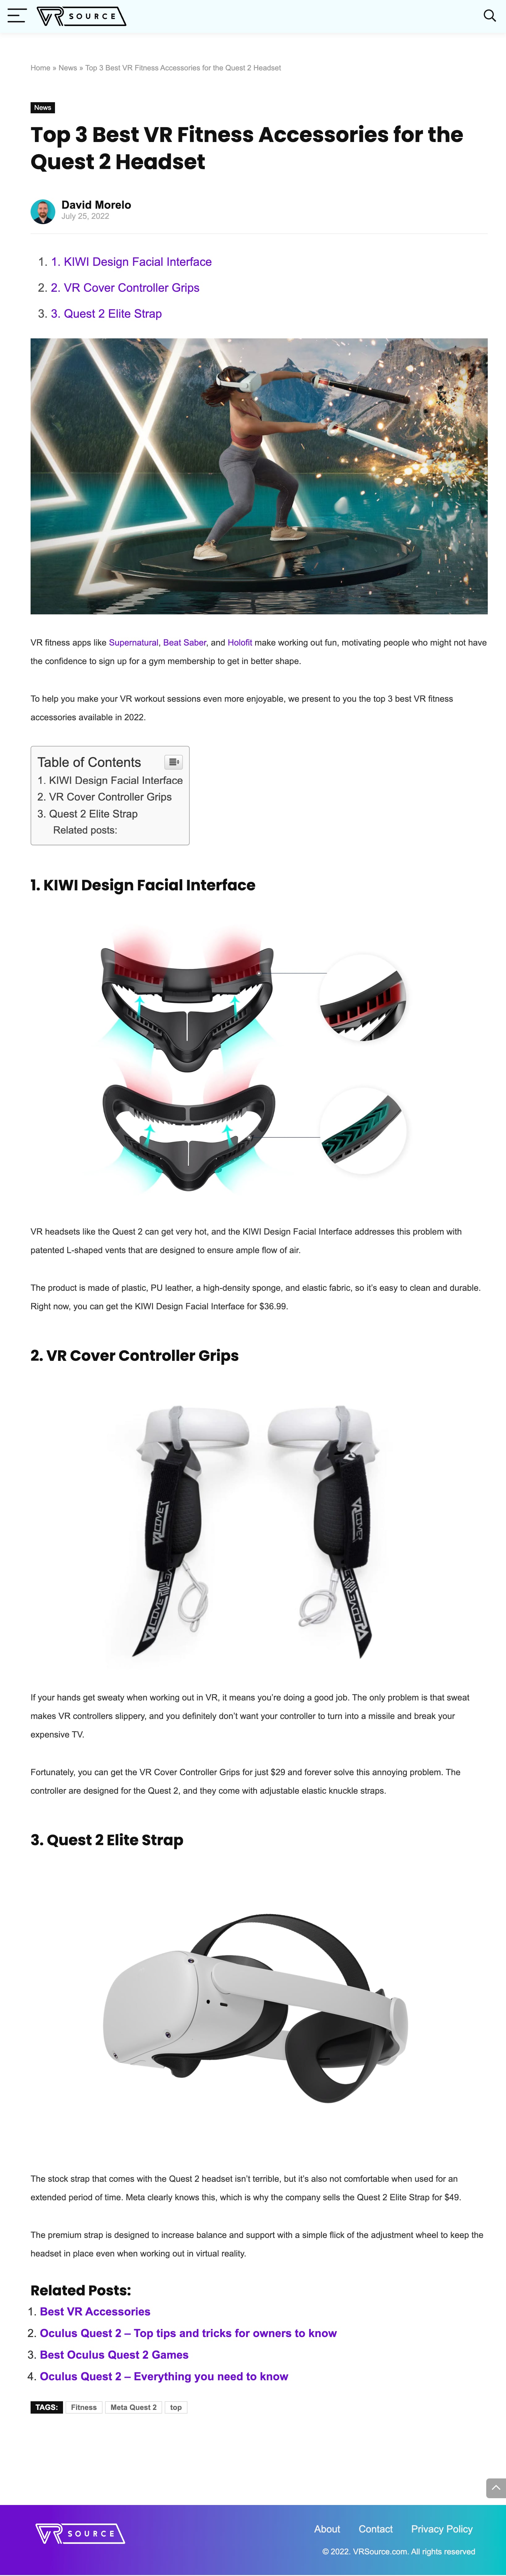 Top 3 Best VR Fitness Accessories for the Quest 2 Headset
